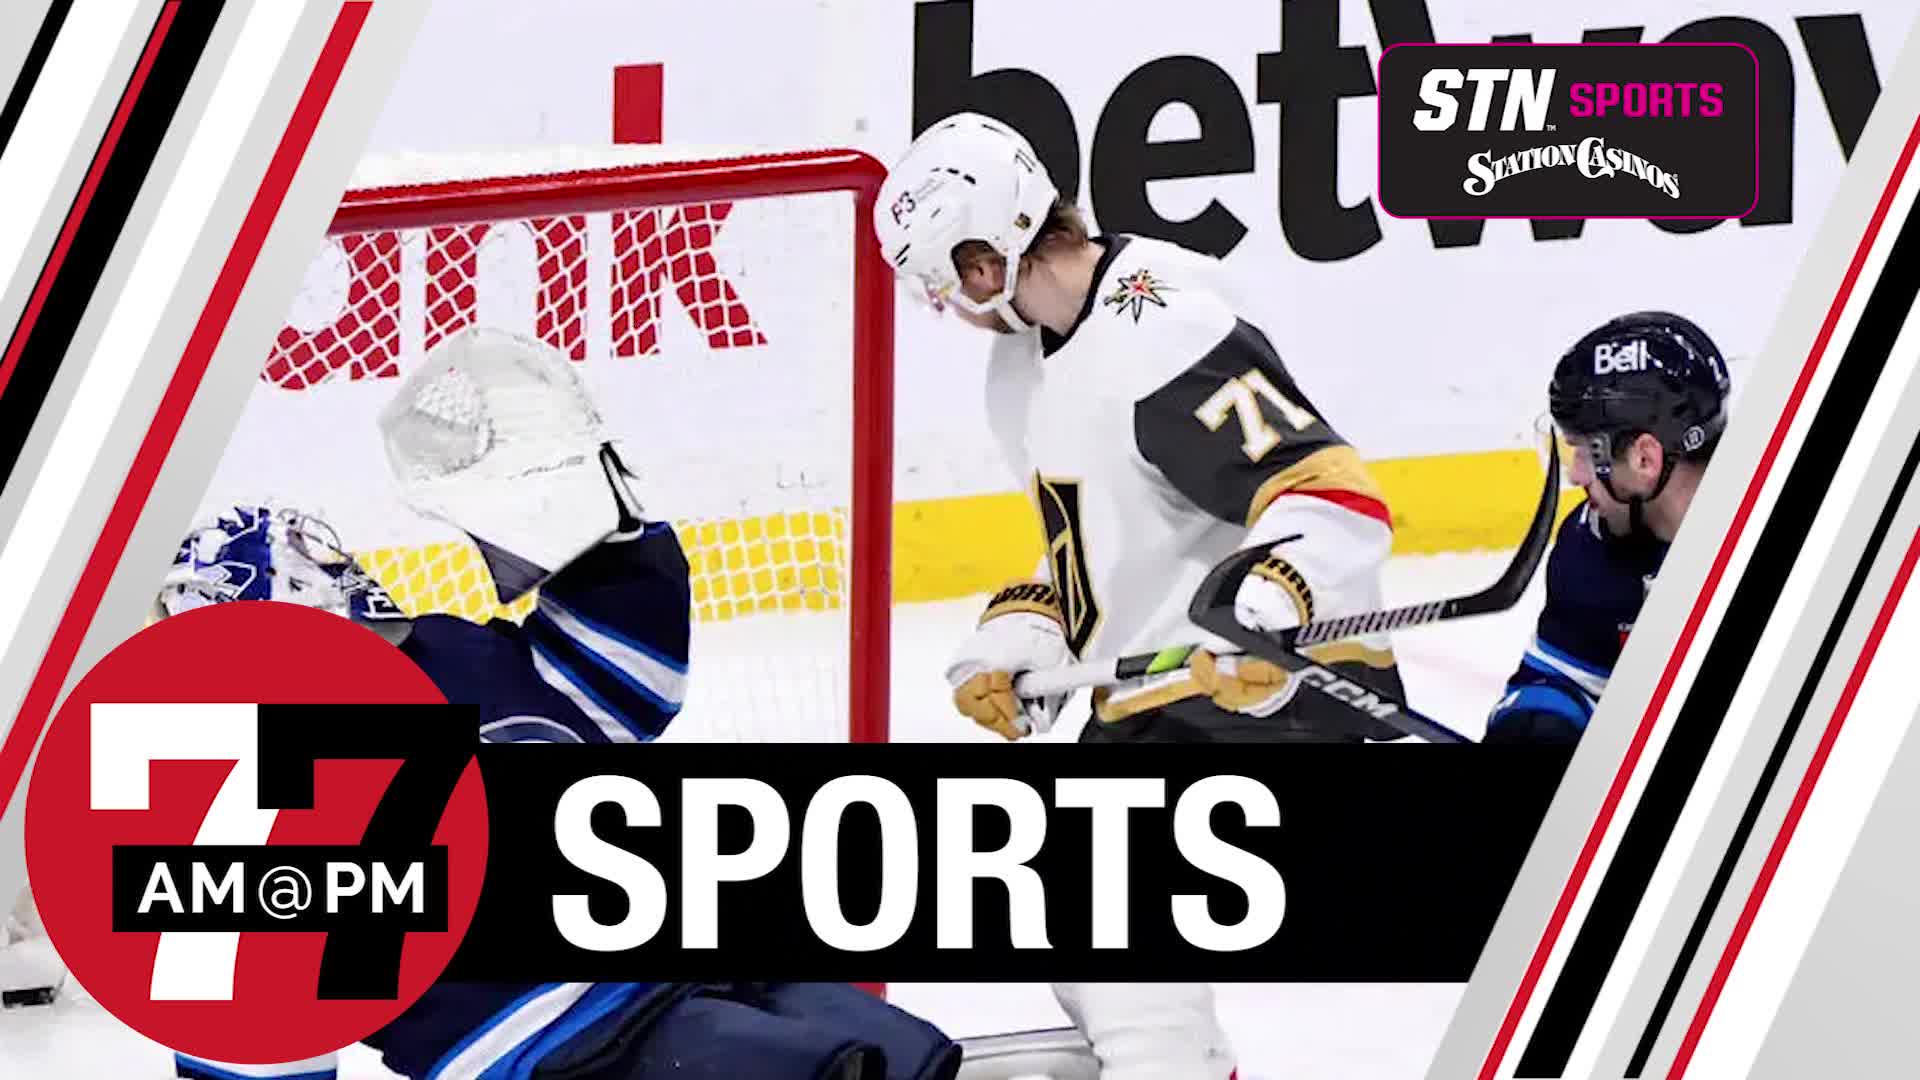 Golden Knights lead series 3-1 against Jets